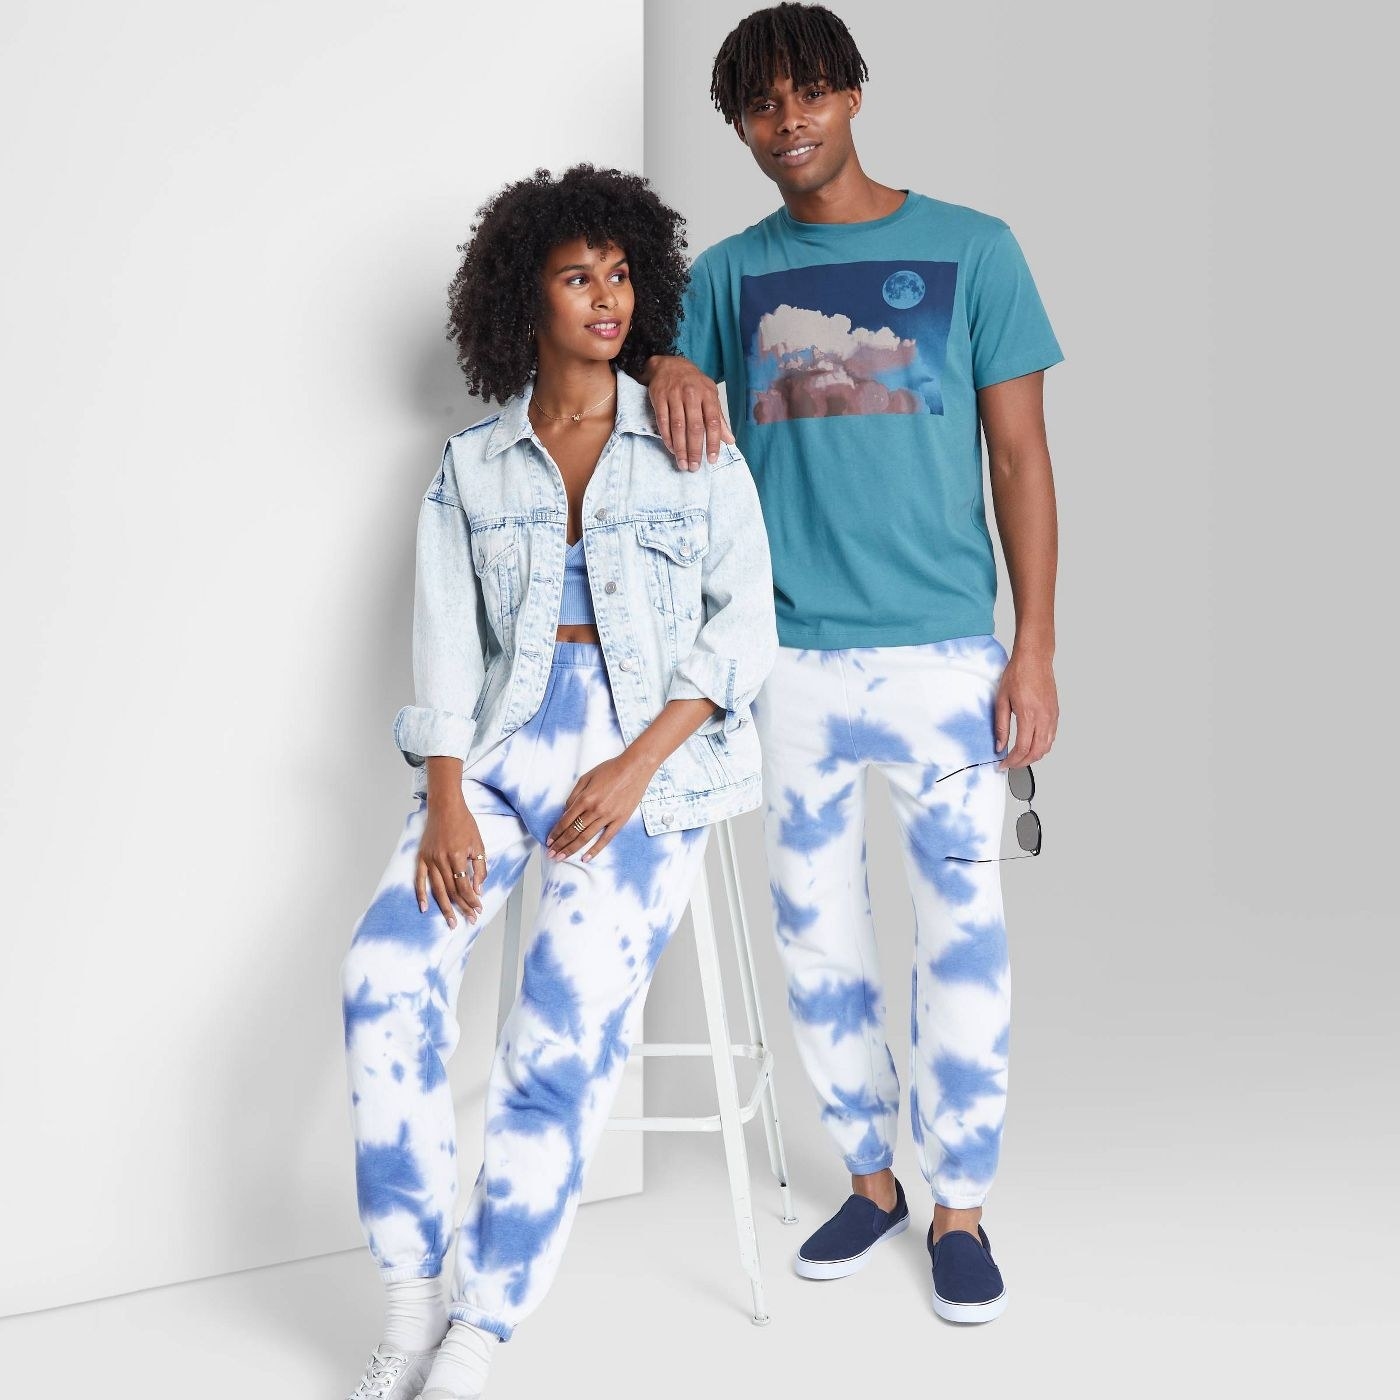 Two models wearing a pair of blue and white tie dye sweatpants